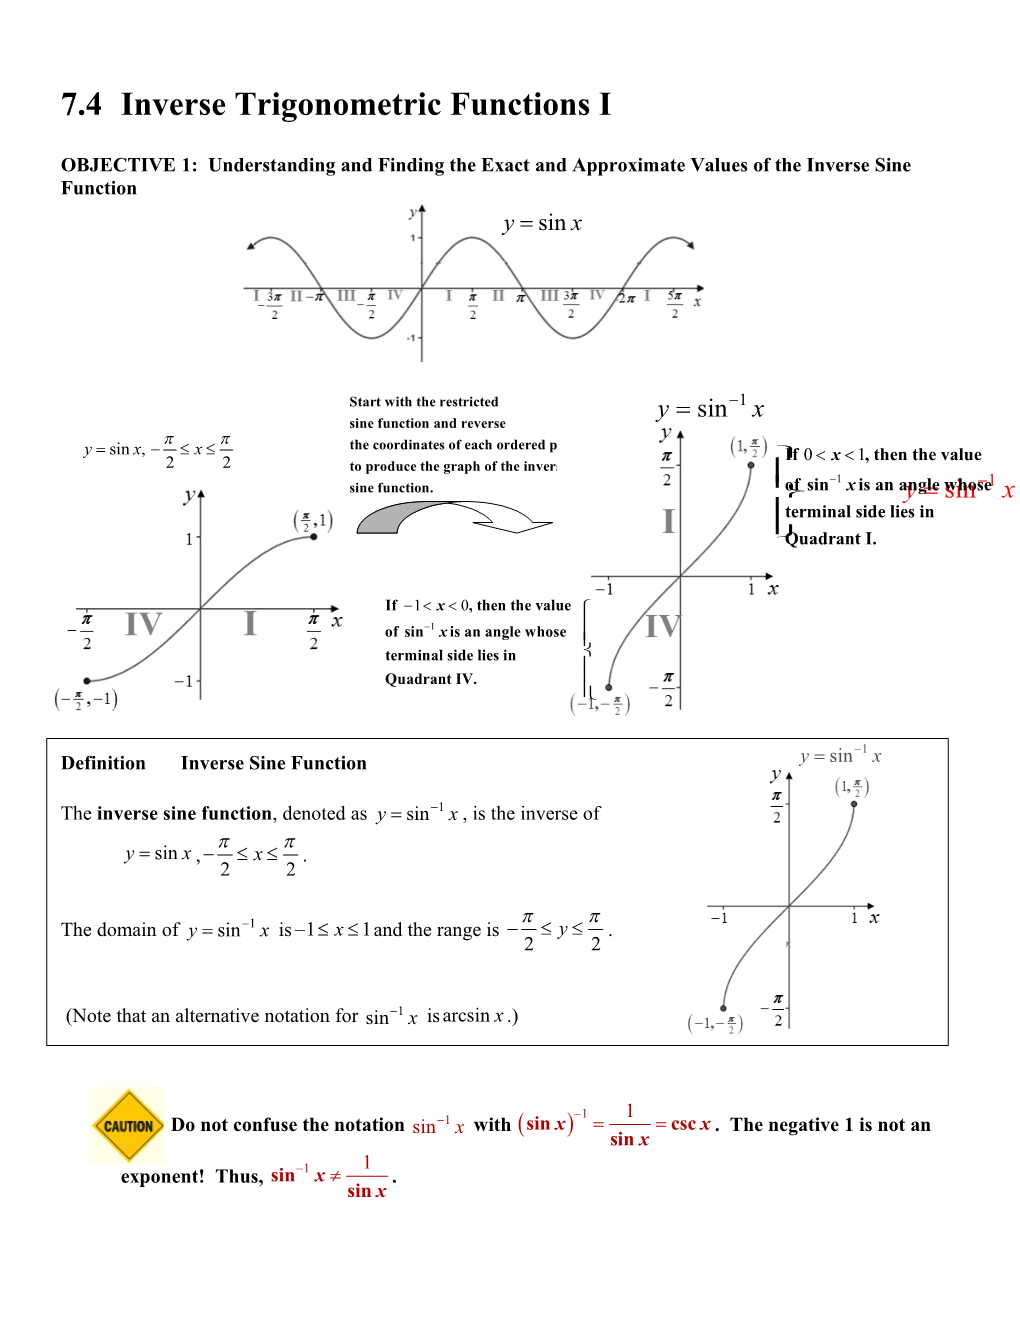 OBJECTIVE1: Understanding and Finding the Exact and Approximate Values of the Inverse Sine